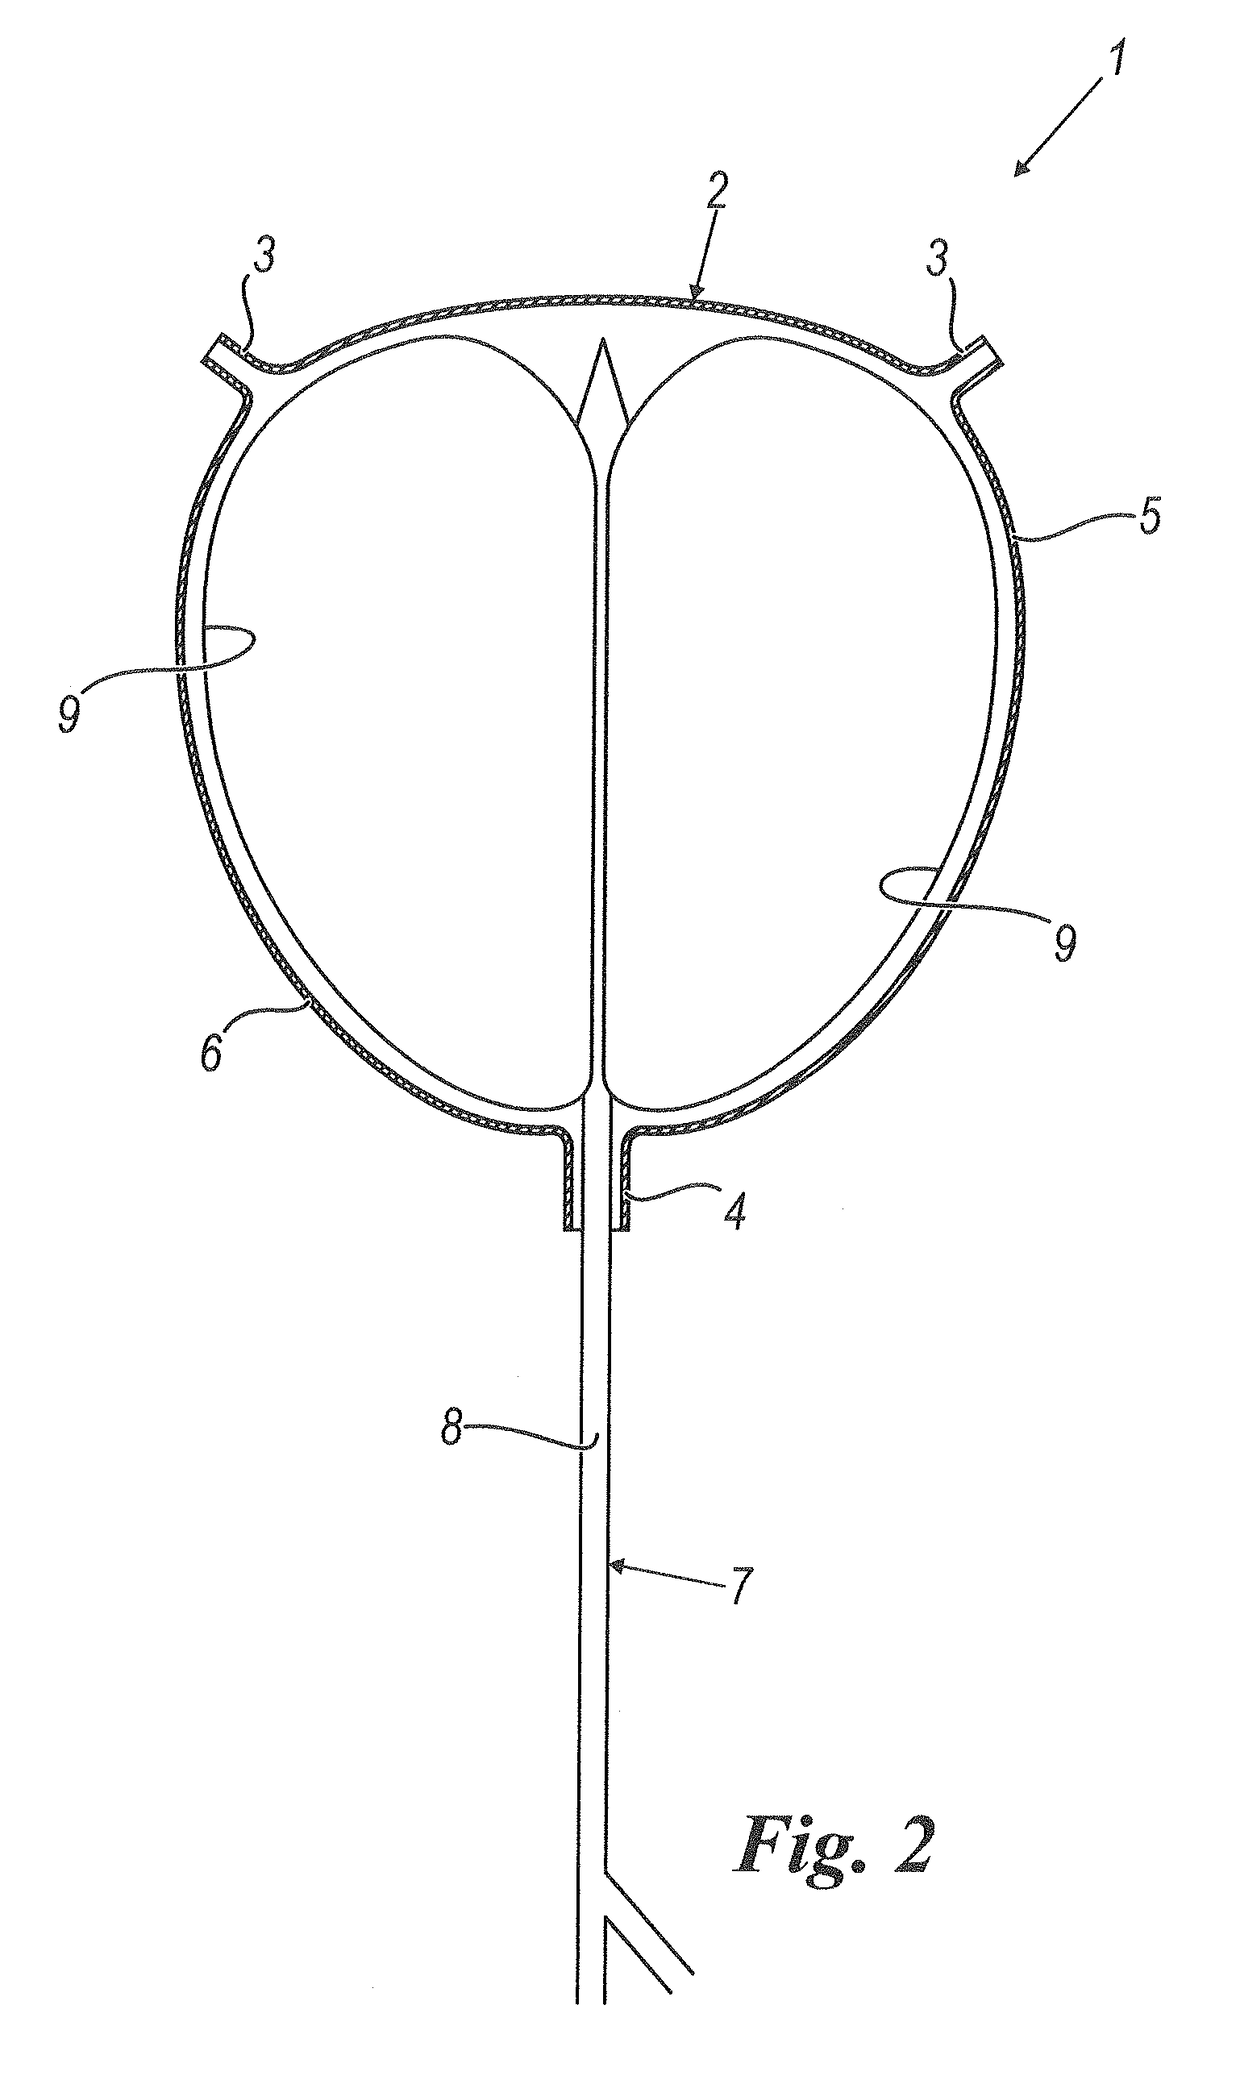 Orthotopic artificial bladder endoprosthesis